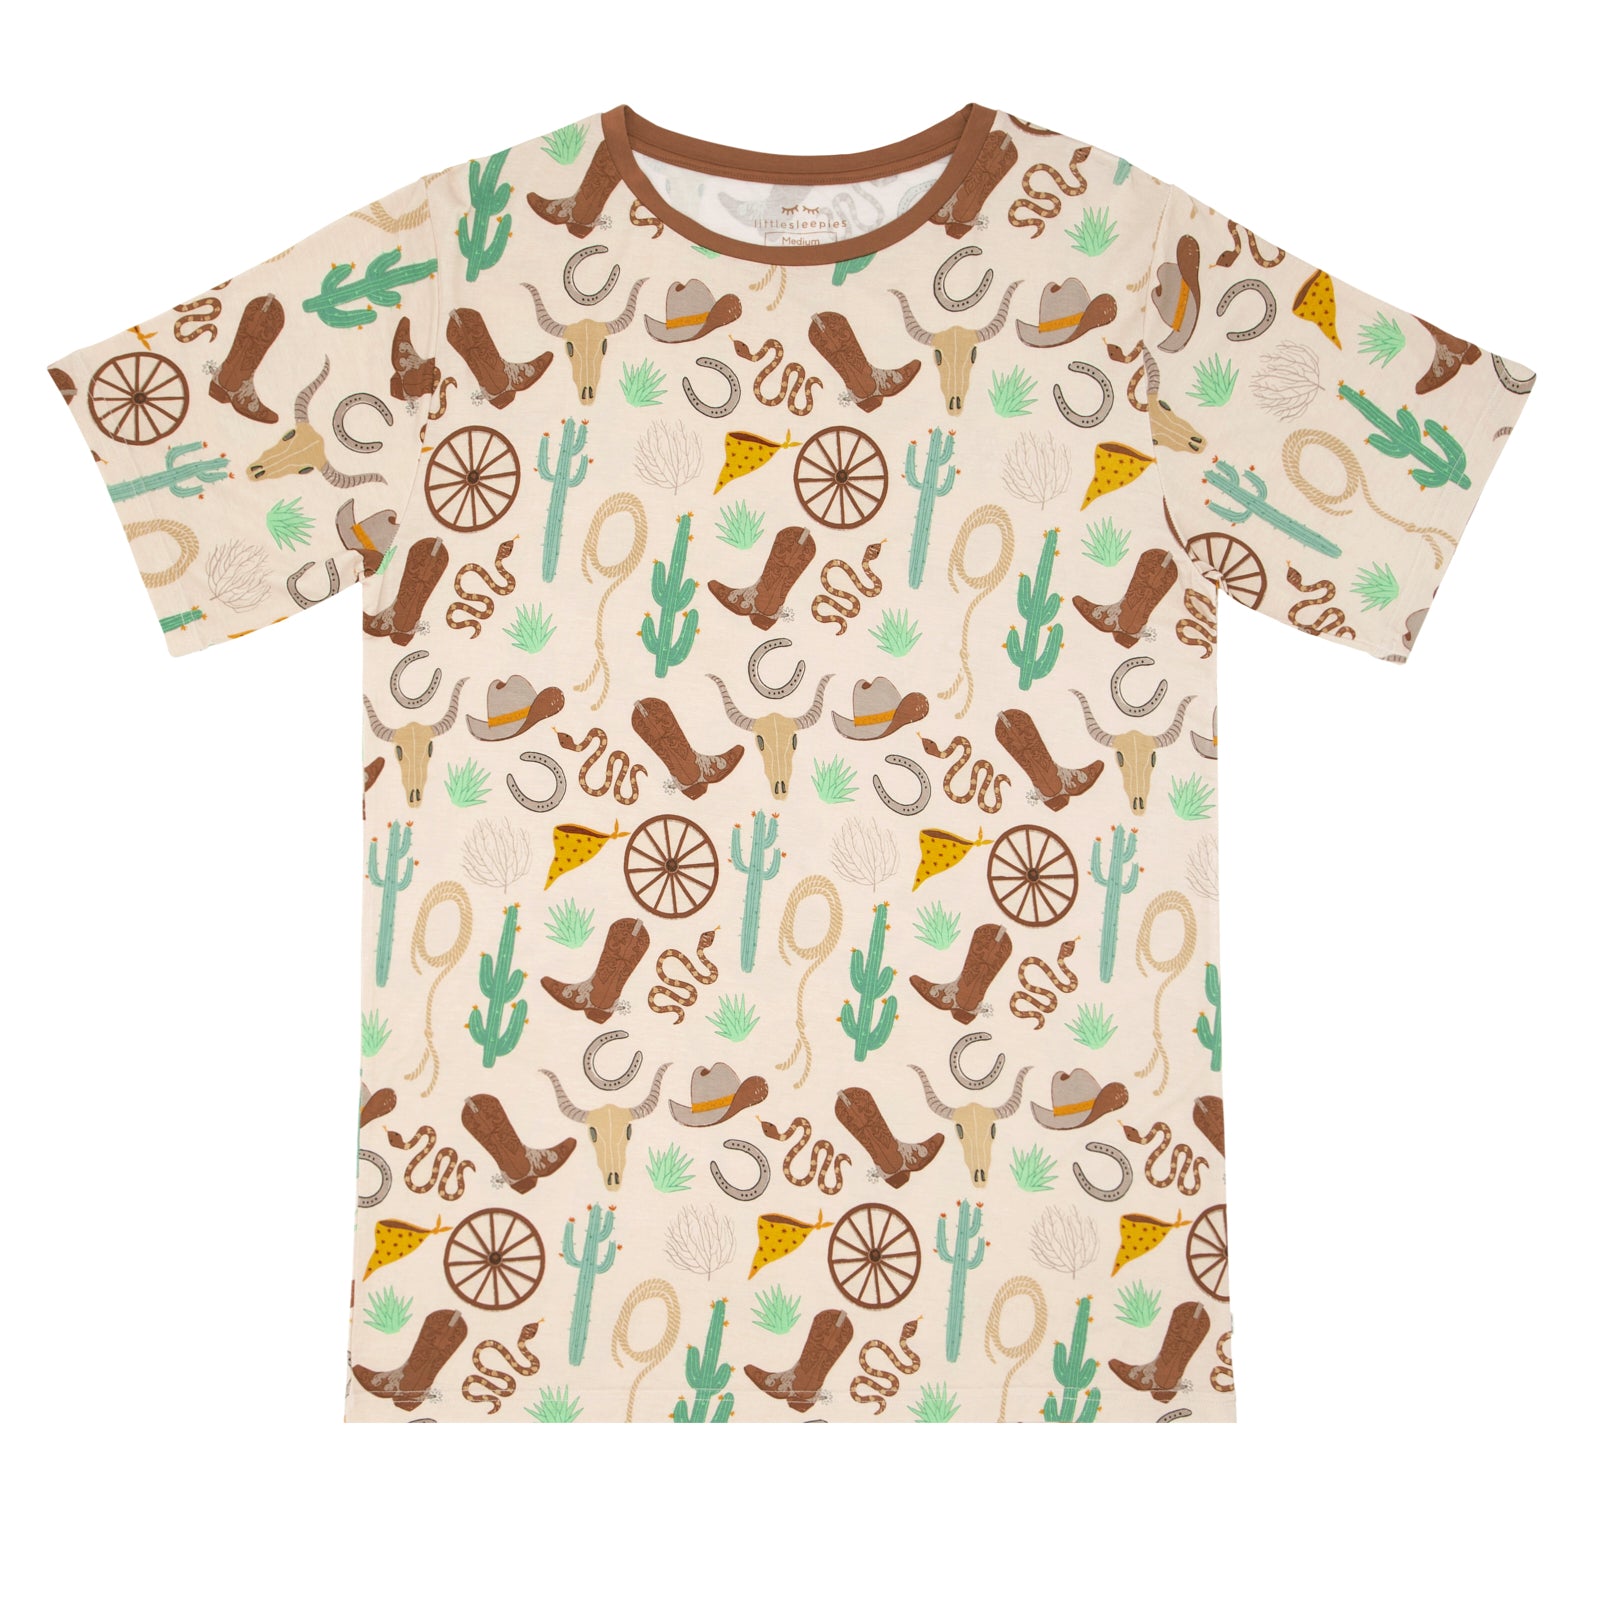 Flat lay image of a men's Caramel Ready to Rodeo short sleeve pajama top